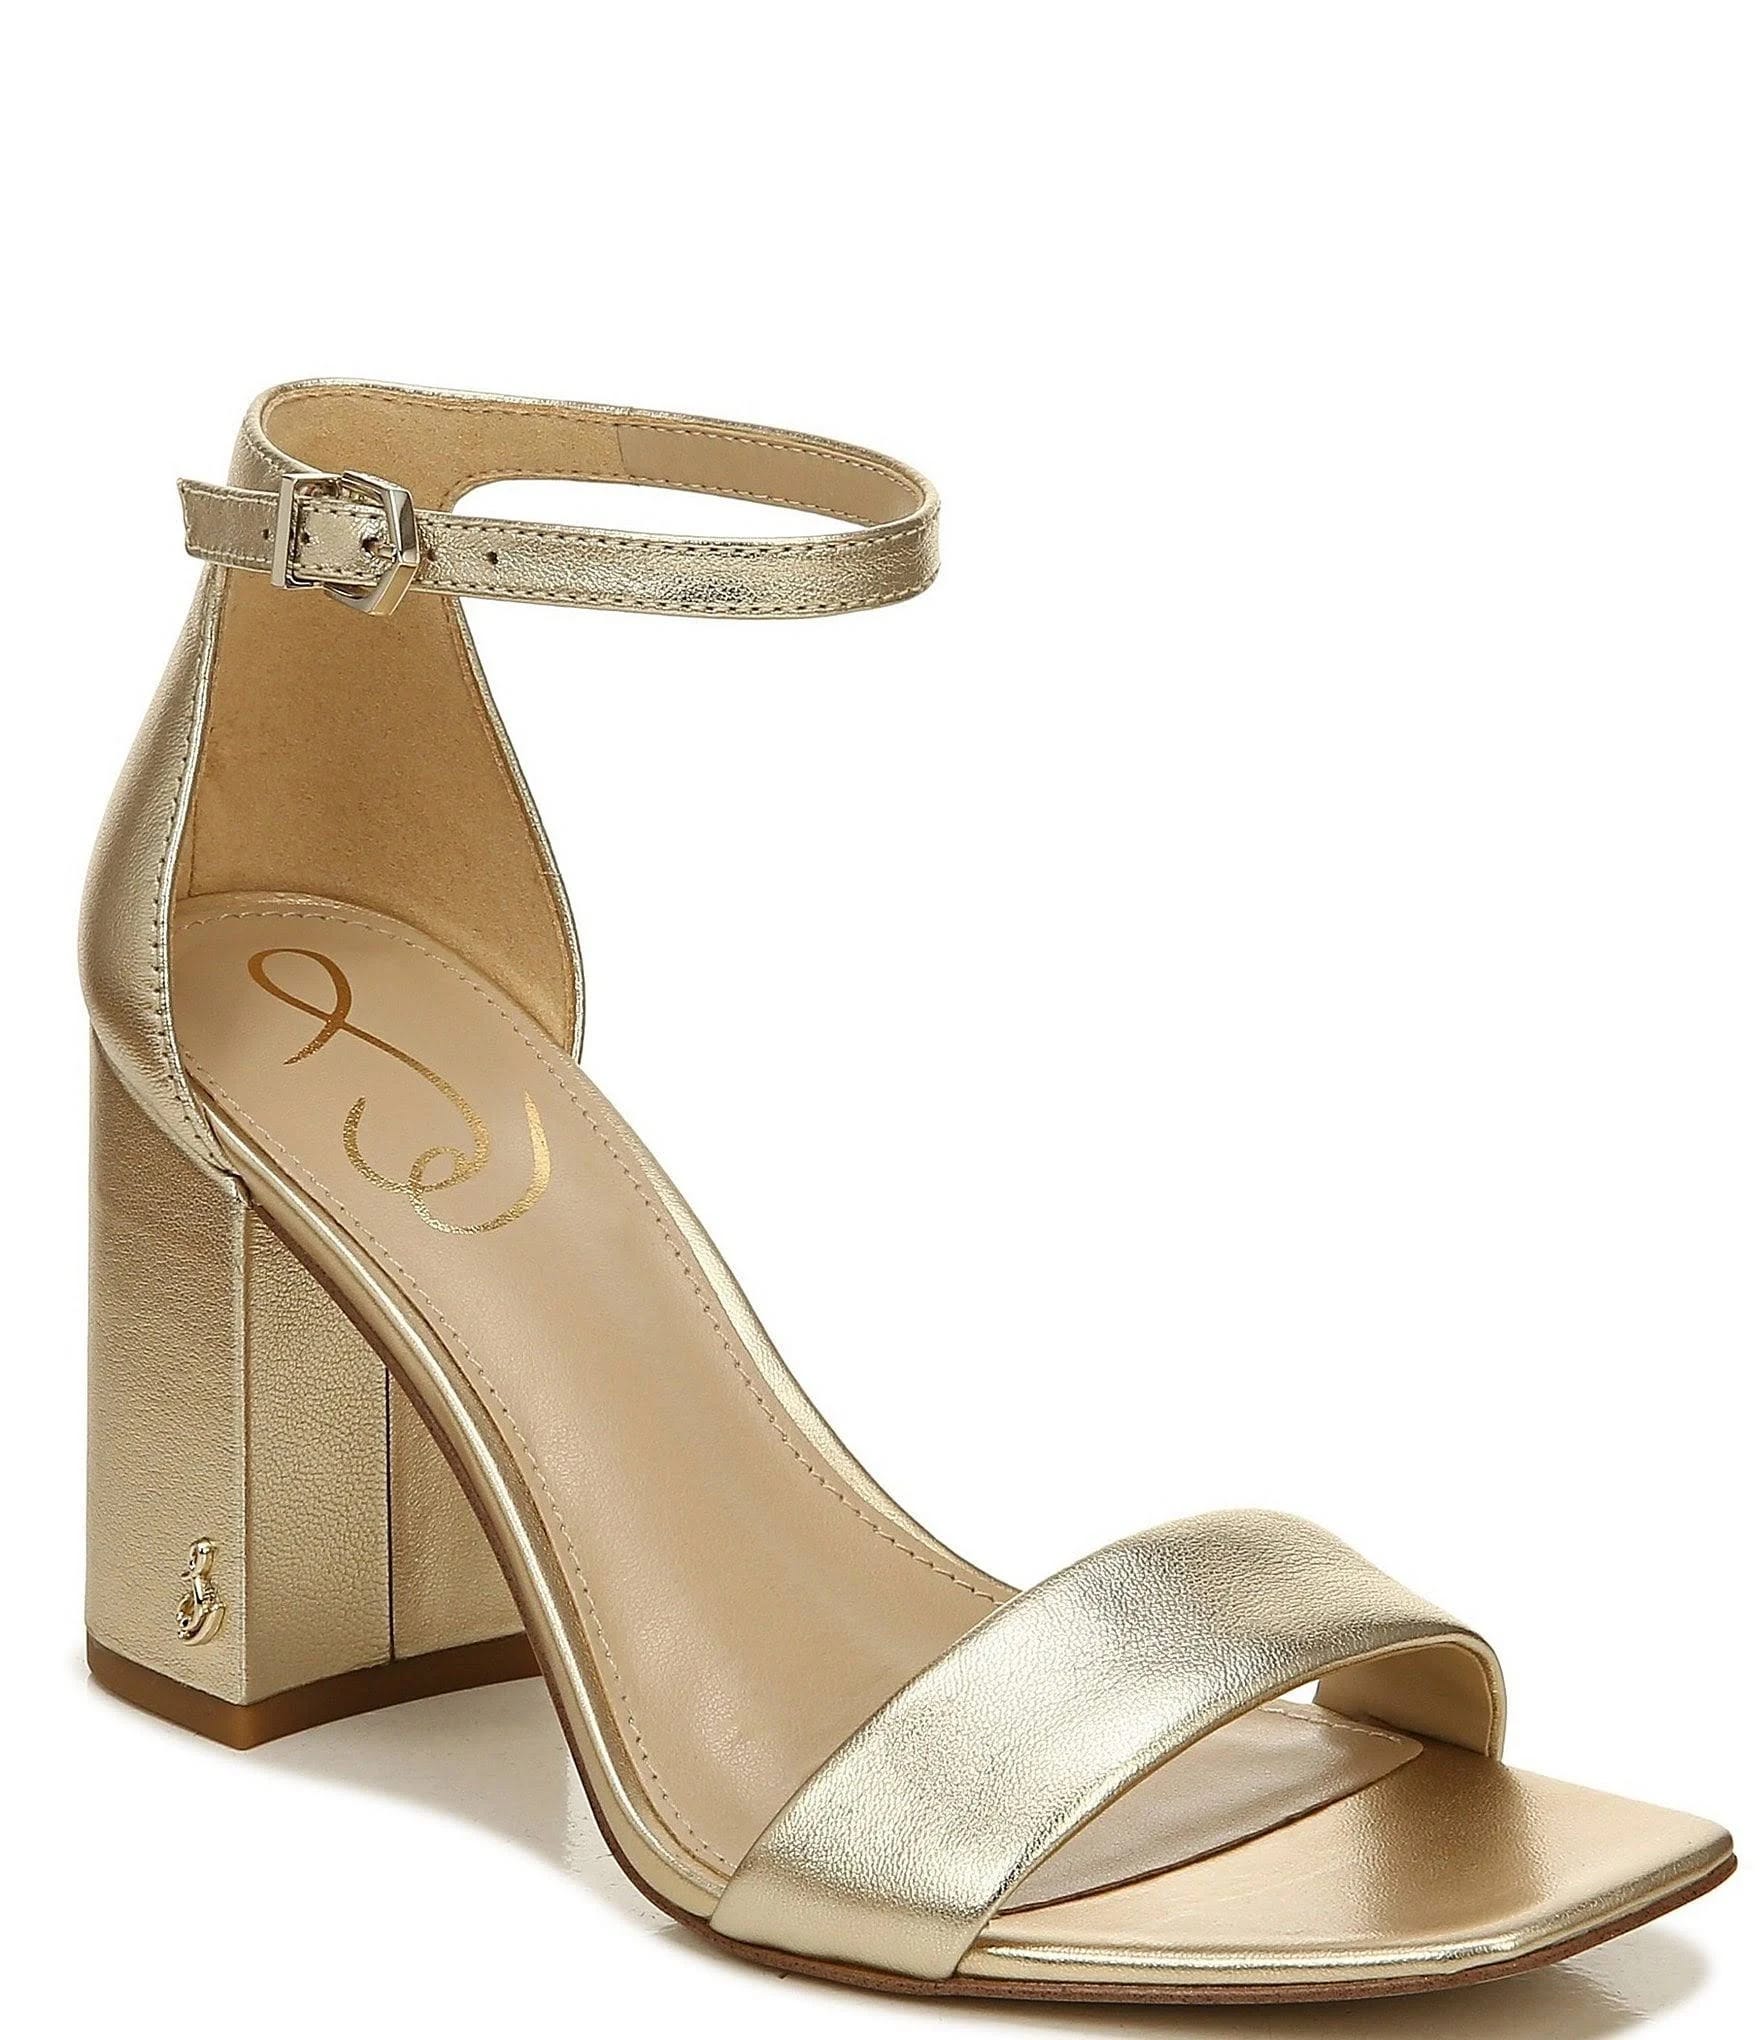 Golden Strappy Dress Shoes: Synthetic Sole, Adjustable Ankle Strap, Square Toe Update | Image